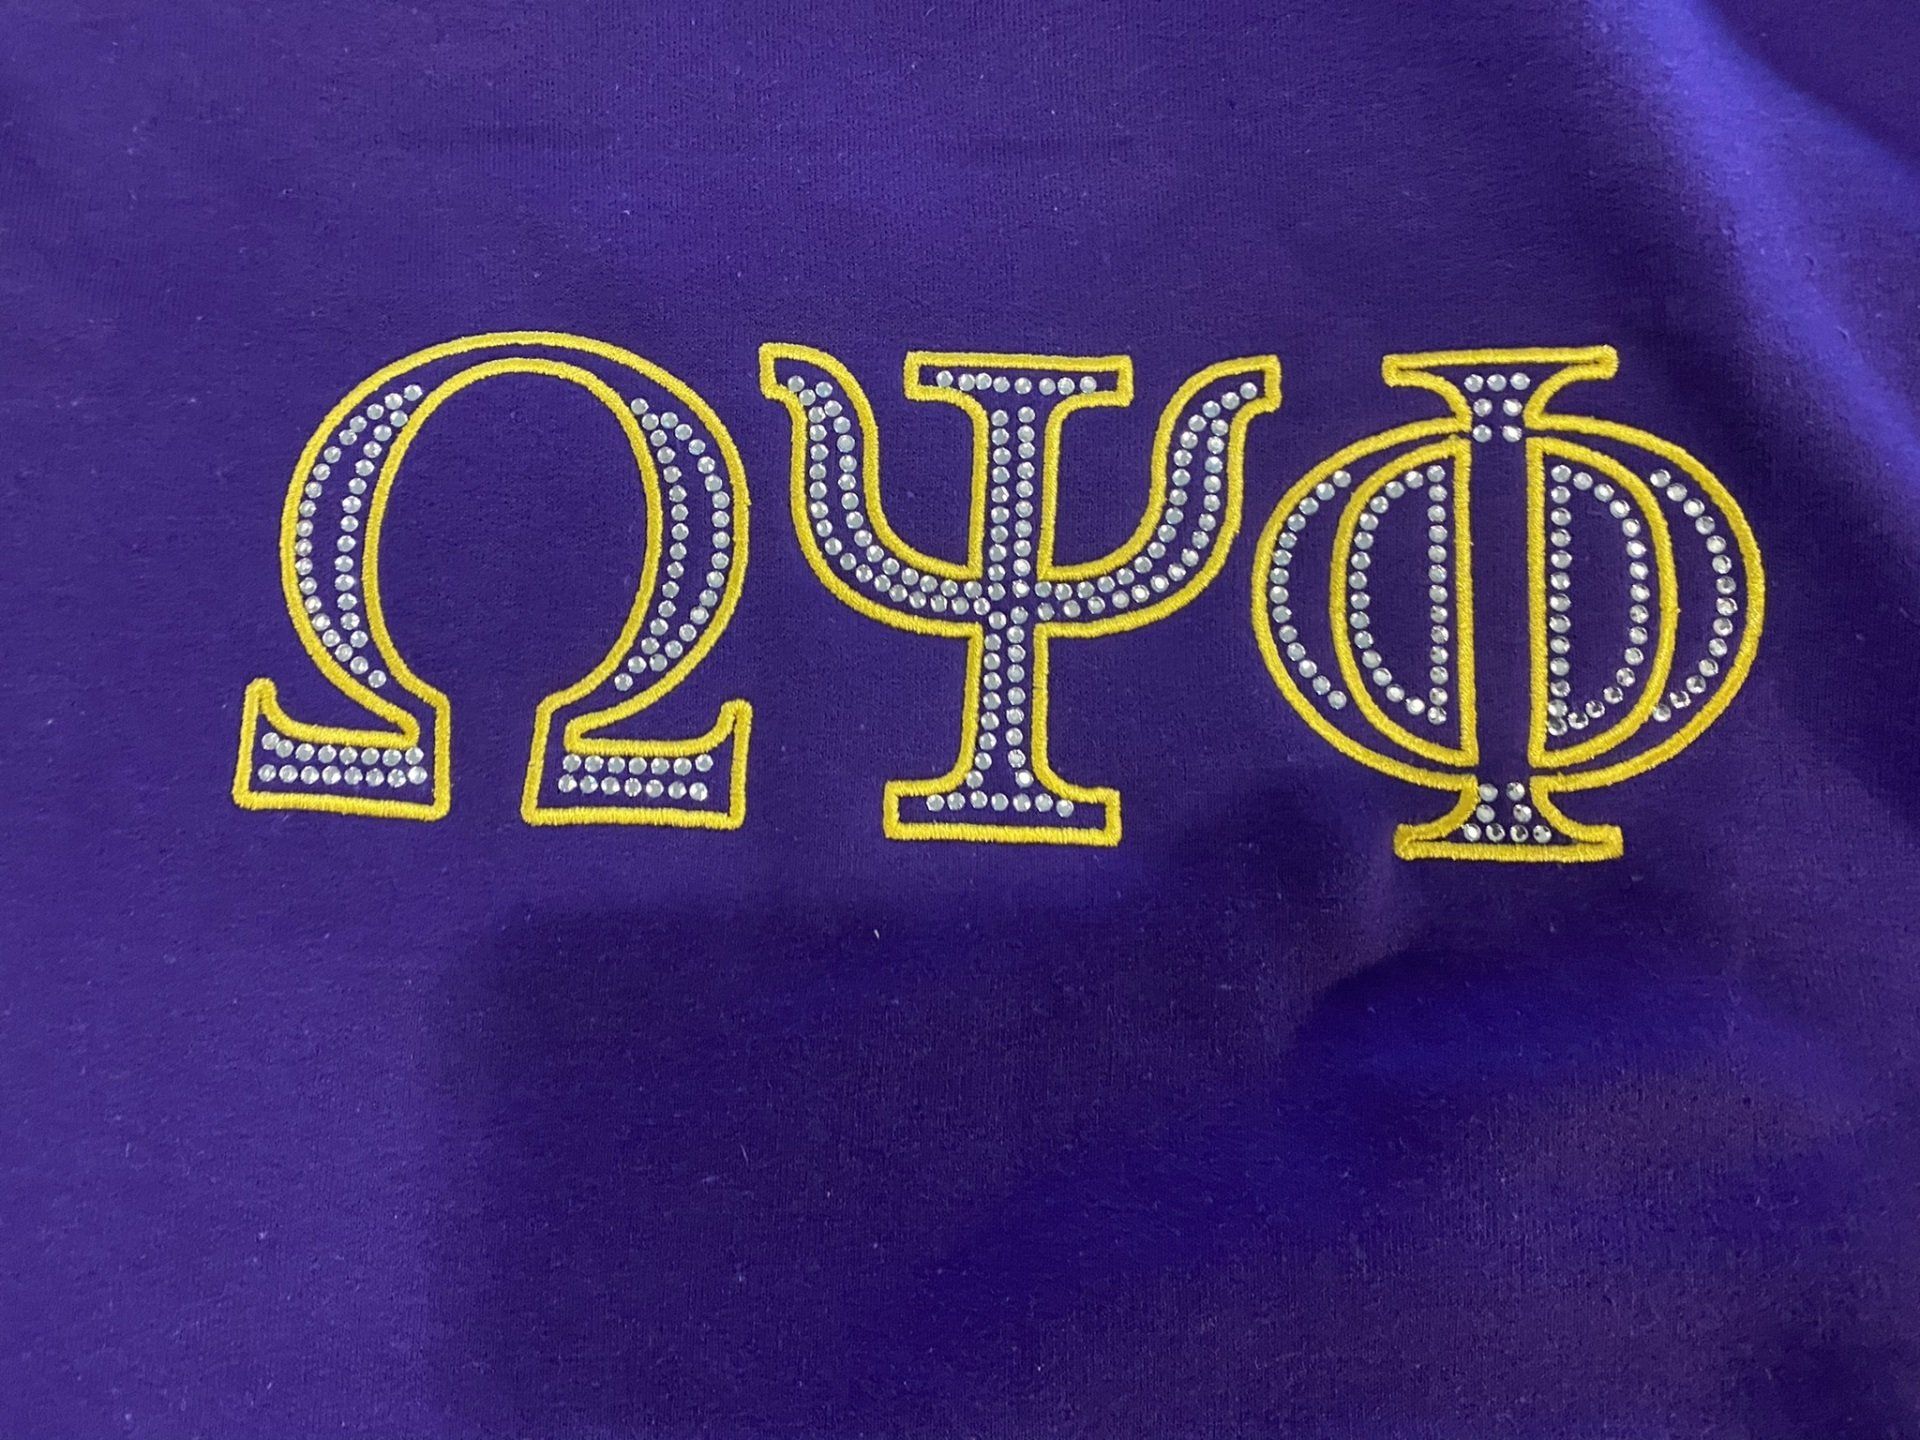 A close up of a purple shirt with the letter o on it